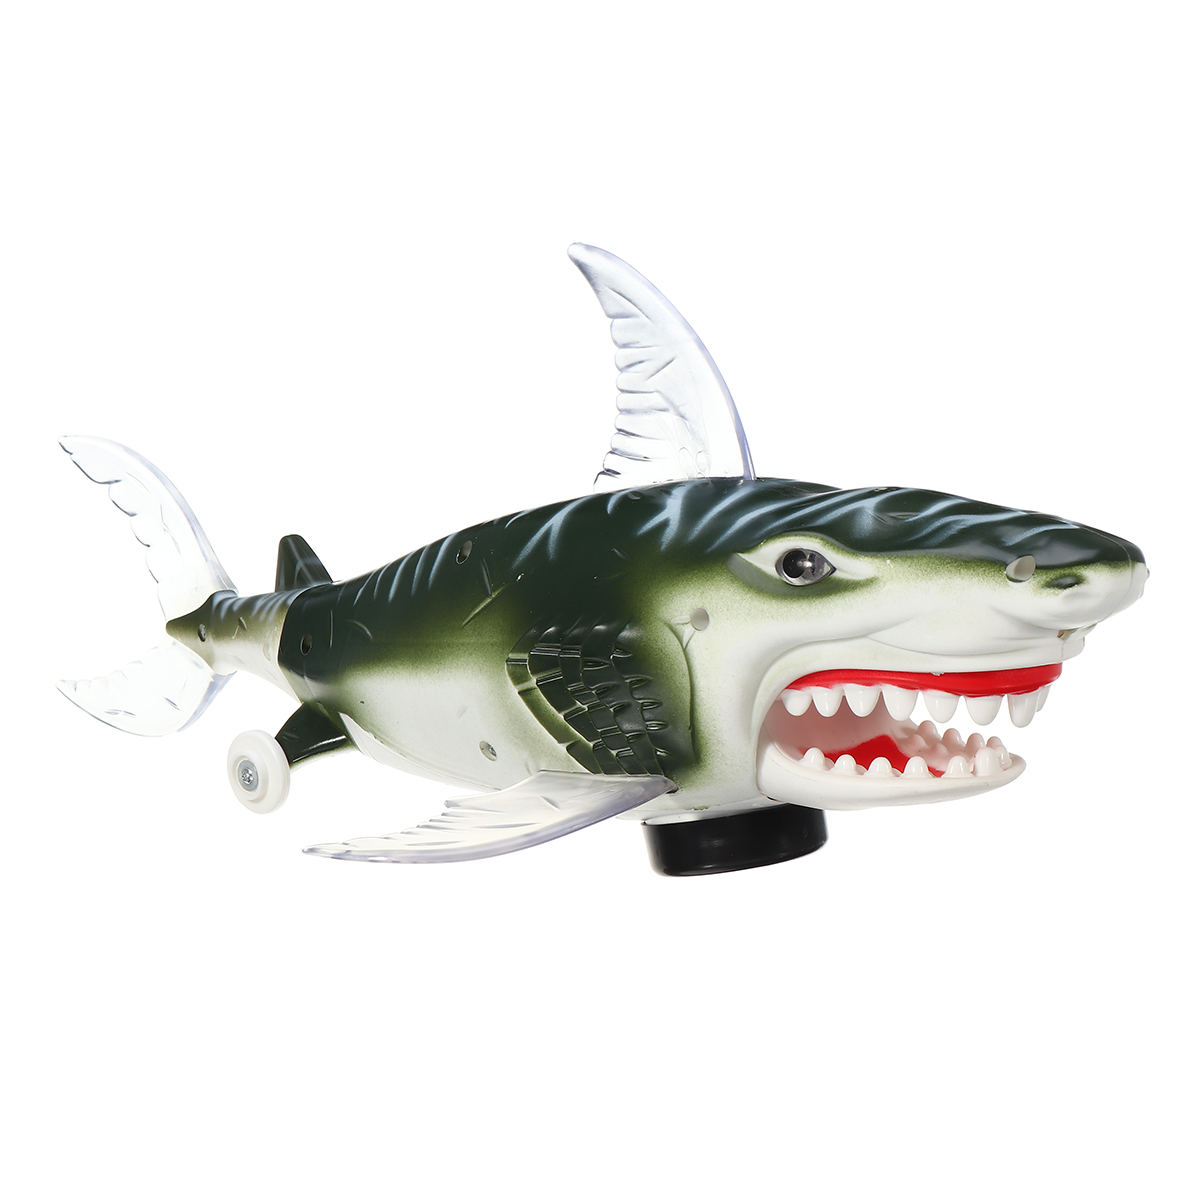 Electric-Projection-Light-Sound-Shark-Walking-Animal-Educational-Toys-for-Kids-Gift-1678213-4